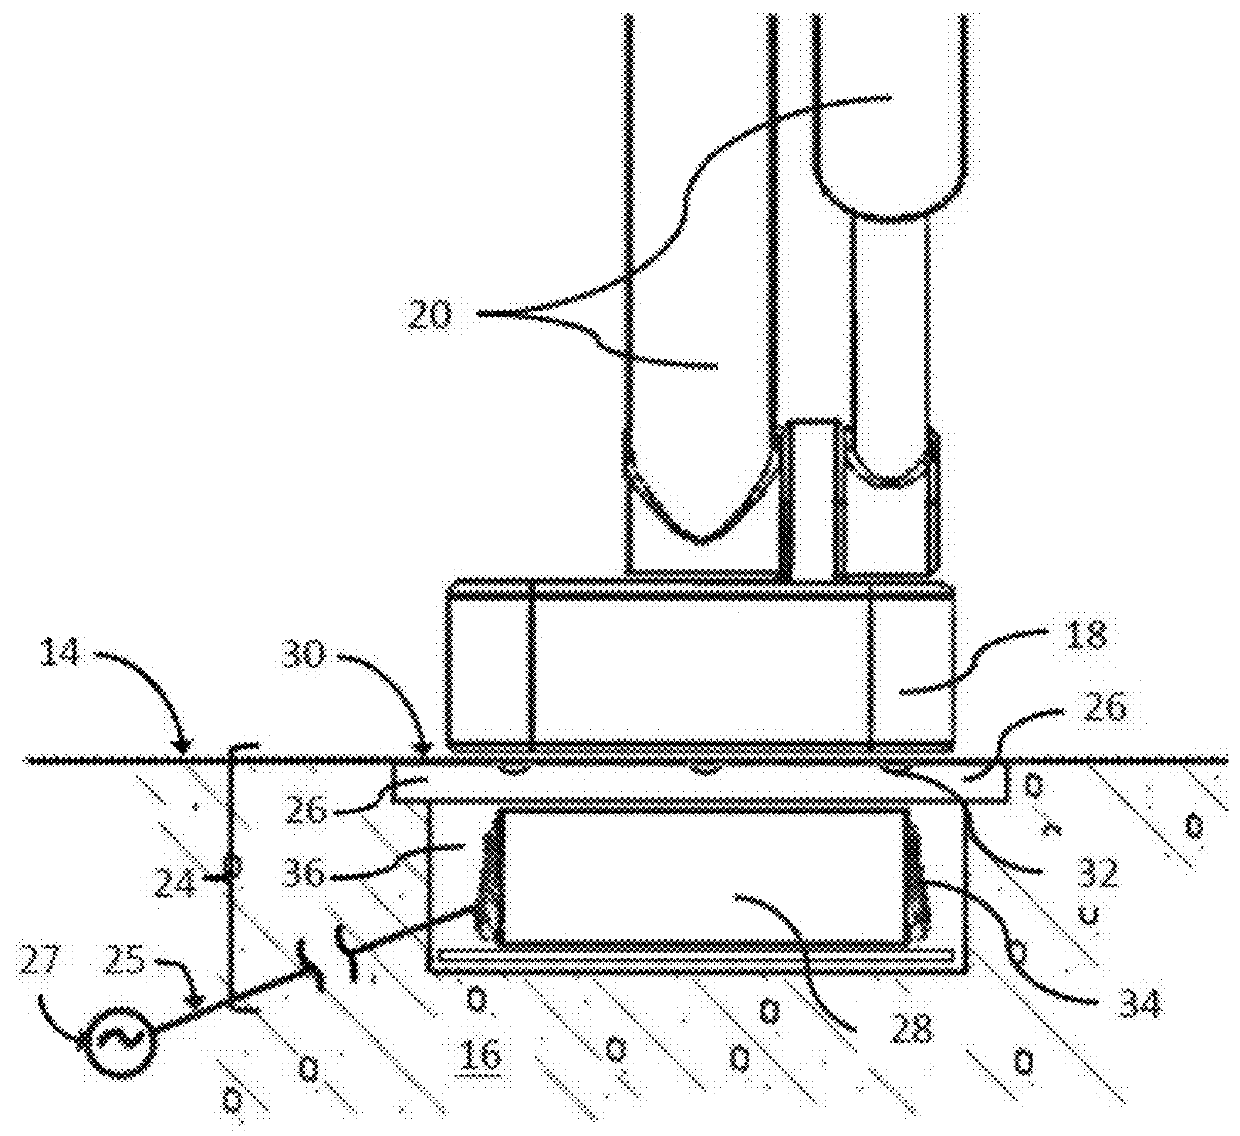 Road bearing for electric vehicle connection